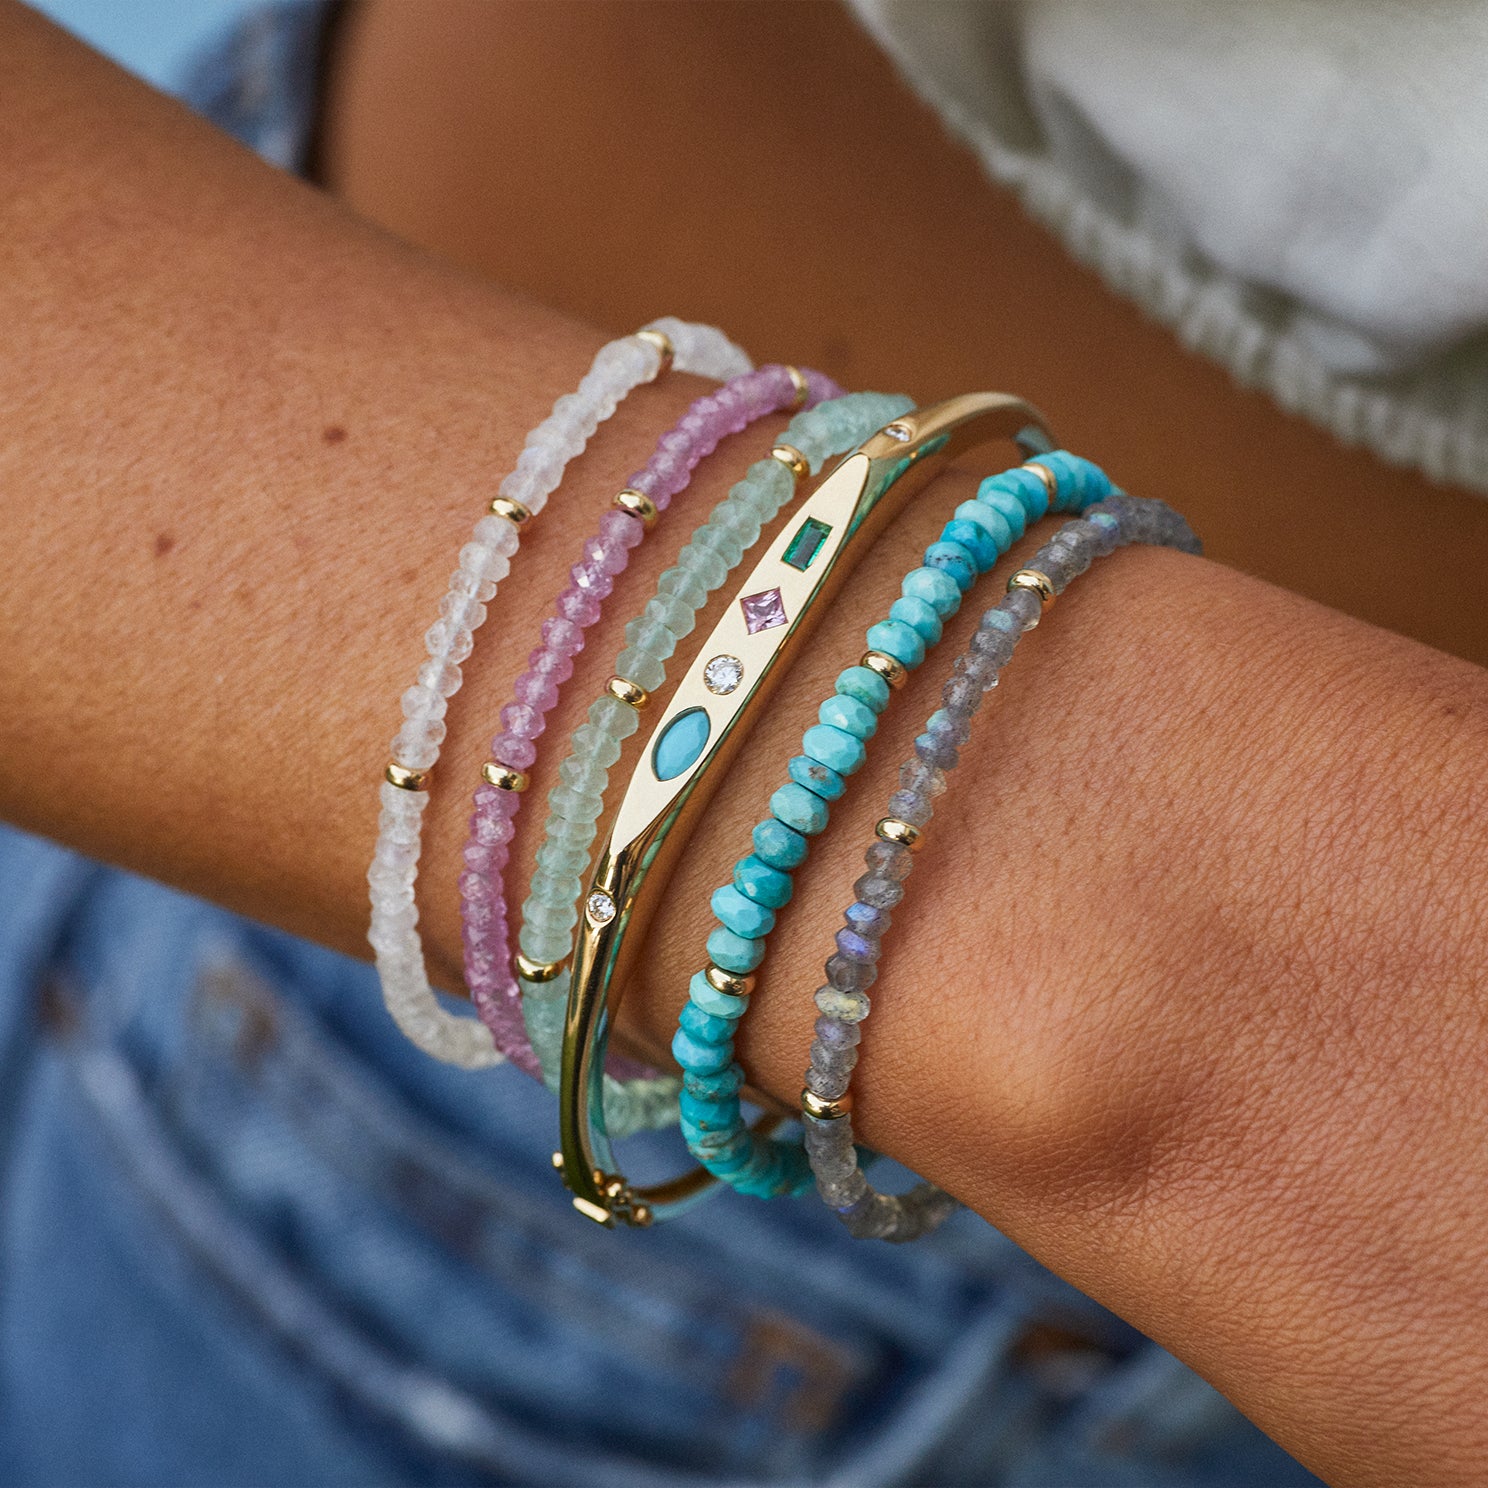 Birthstone Bead Bracelet In Turquoise styled on wrist with four beaded bracelets and one gold treasure bangle bracelet